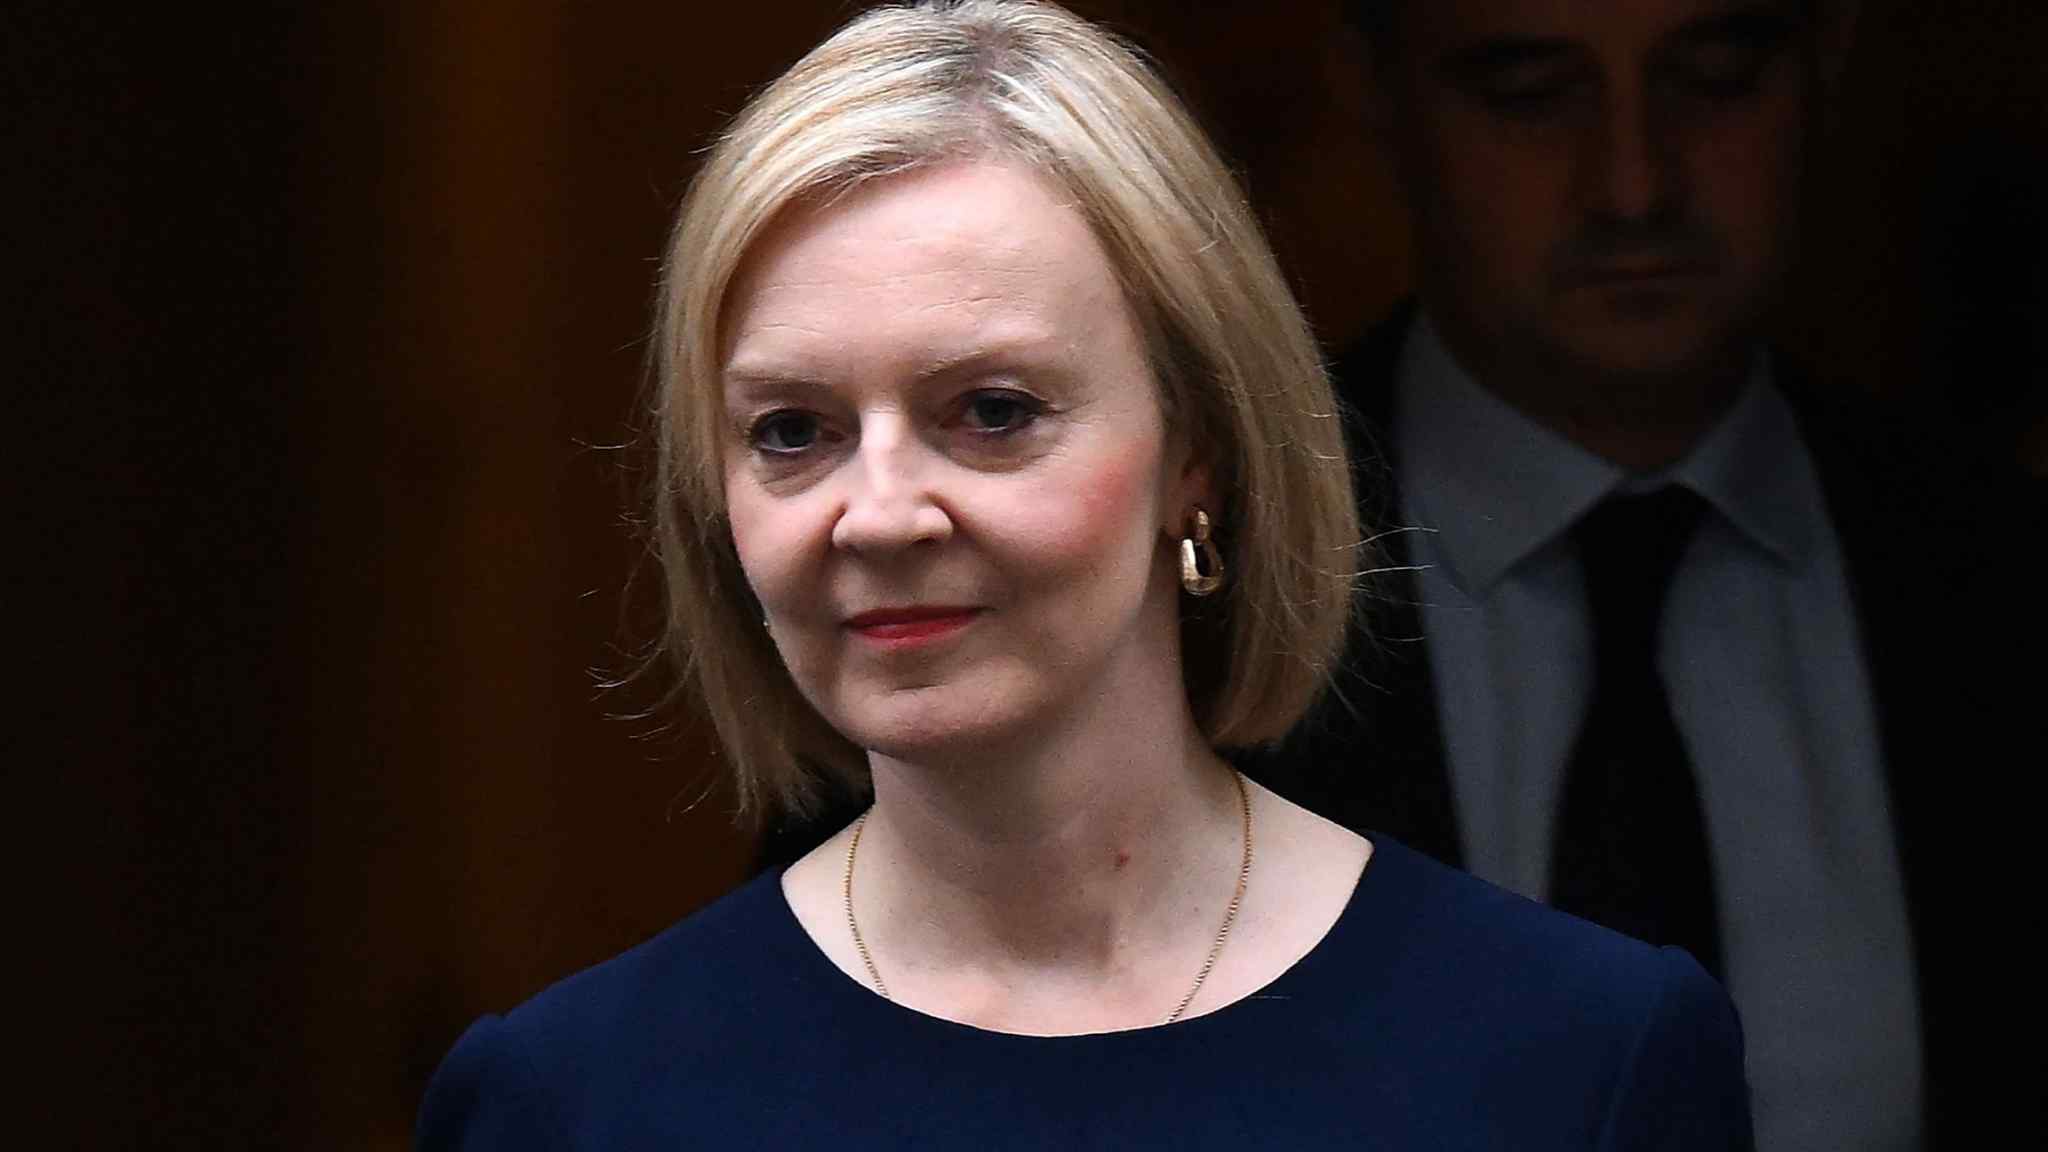 Truss faces growing Tory pressure as Labour opens 33-point poll lead